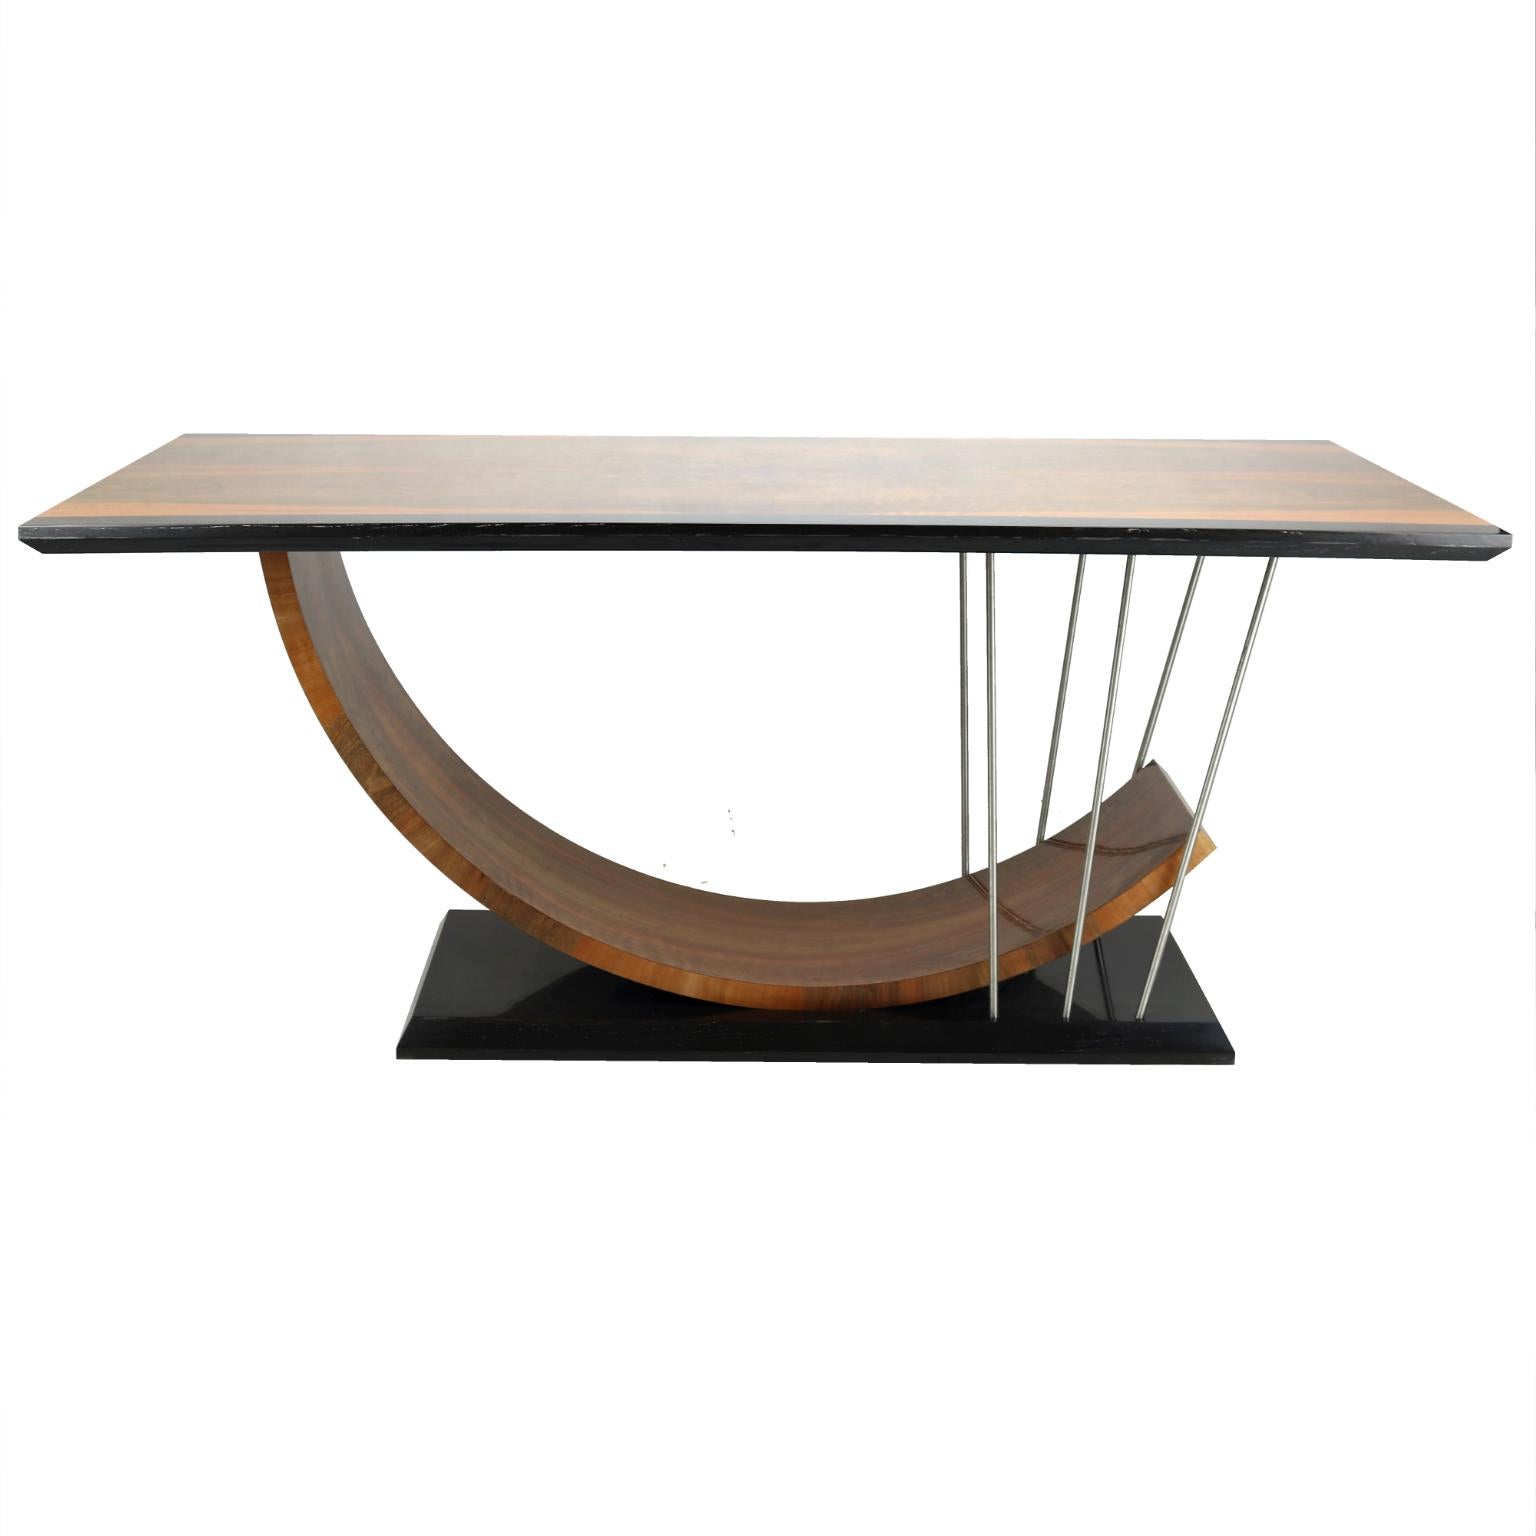 New dining table made of black mud oak wood, walnut weneer and stainless steel. Made to order.
100% handmade.